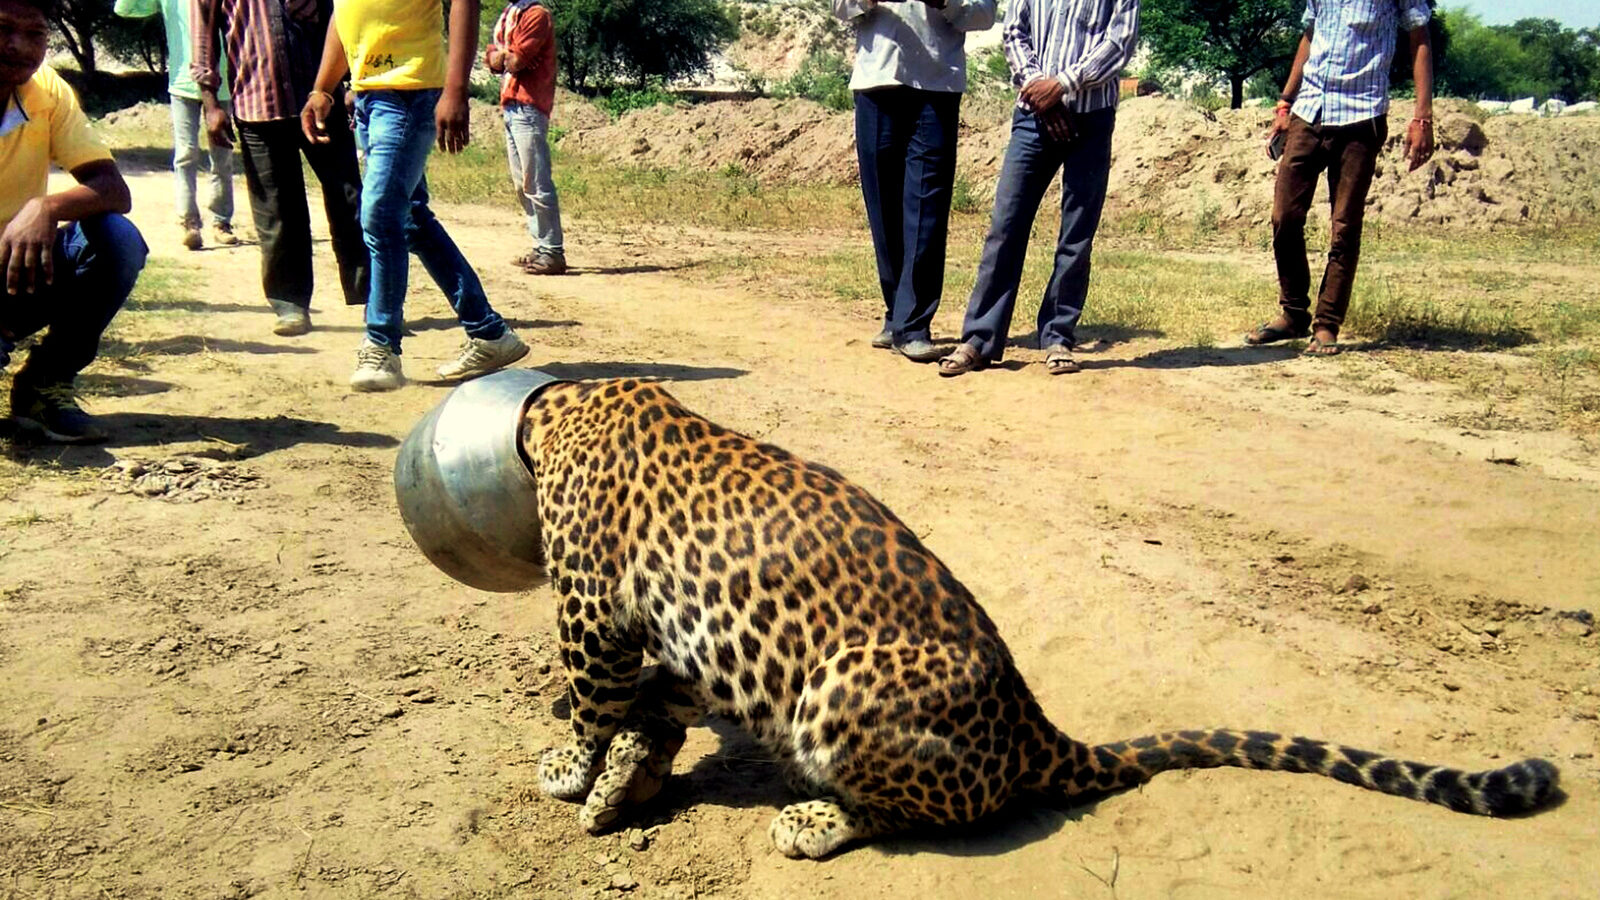 People stand around a leopard with its head stuck in a vessel in Rajsamand district of Rajasthan state, India, Wednesday, Sept. 30, 2015. The leopard’s head got stuck when it attempted to drink water from the pot, according to news reports. Forest officials tranquilized the animal and sawed off the vessel later in the day. (AP Photo/Kabir Jethi)